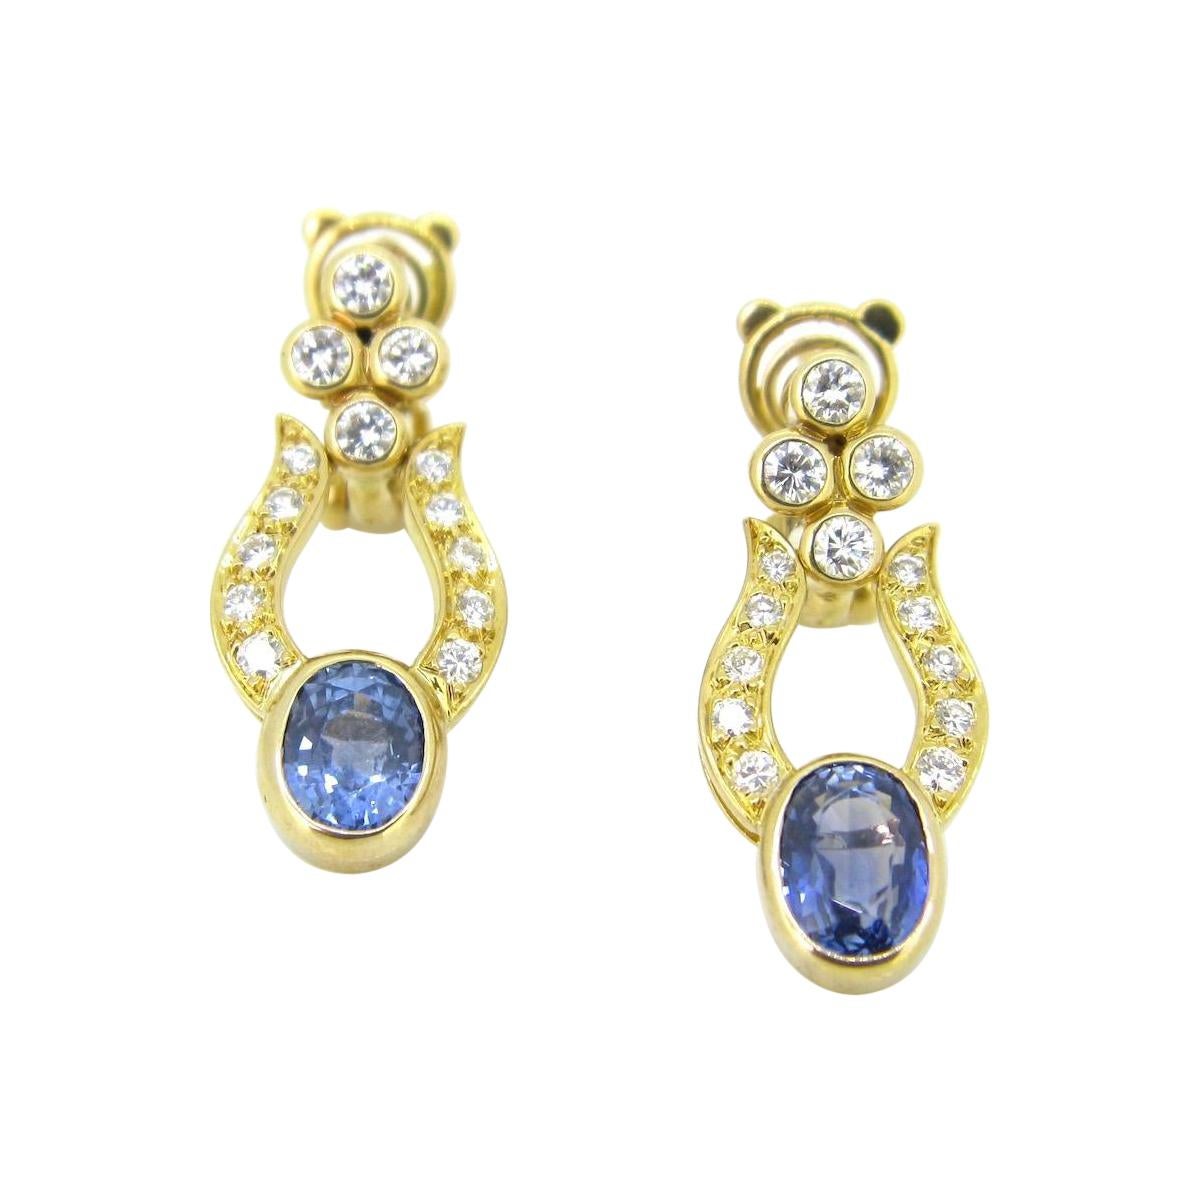 Ceylon Sapphires and Diamonds Earrings, 18kt Yellow Gold, France